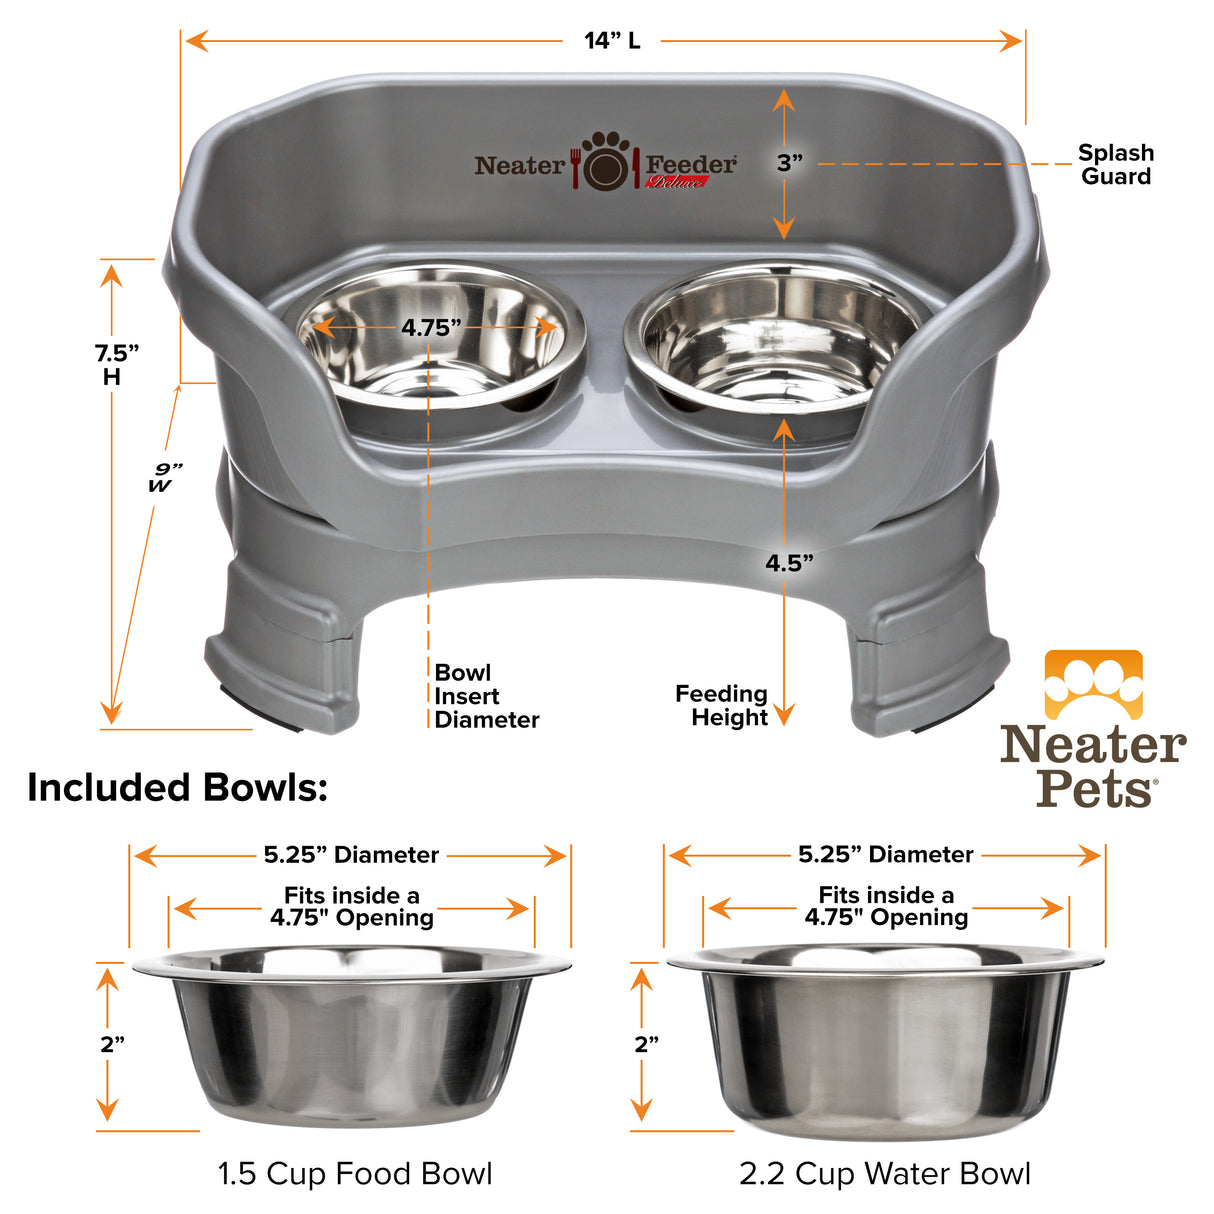 Neater Pet Brands Big Bowl with Leg Extensions Huge Jumbo Trough Style Dog Pet Water Dish (1.25 Gallons, Champagne)